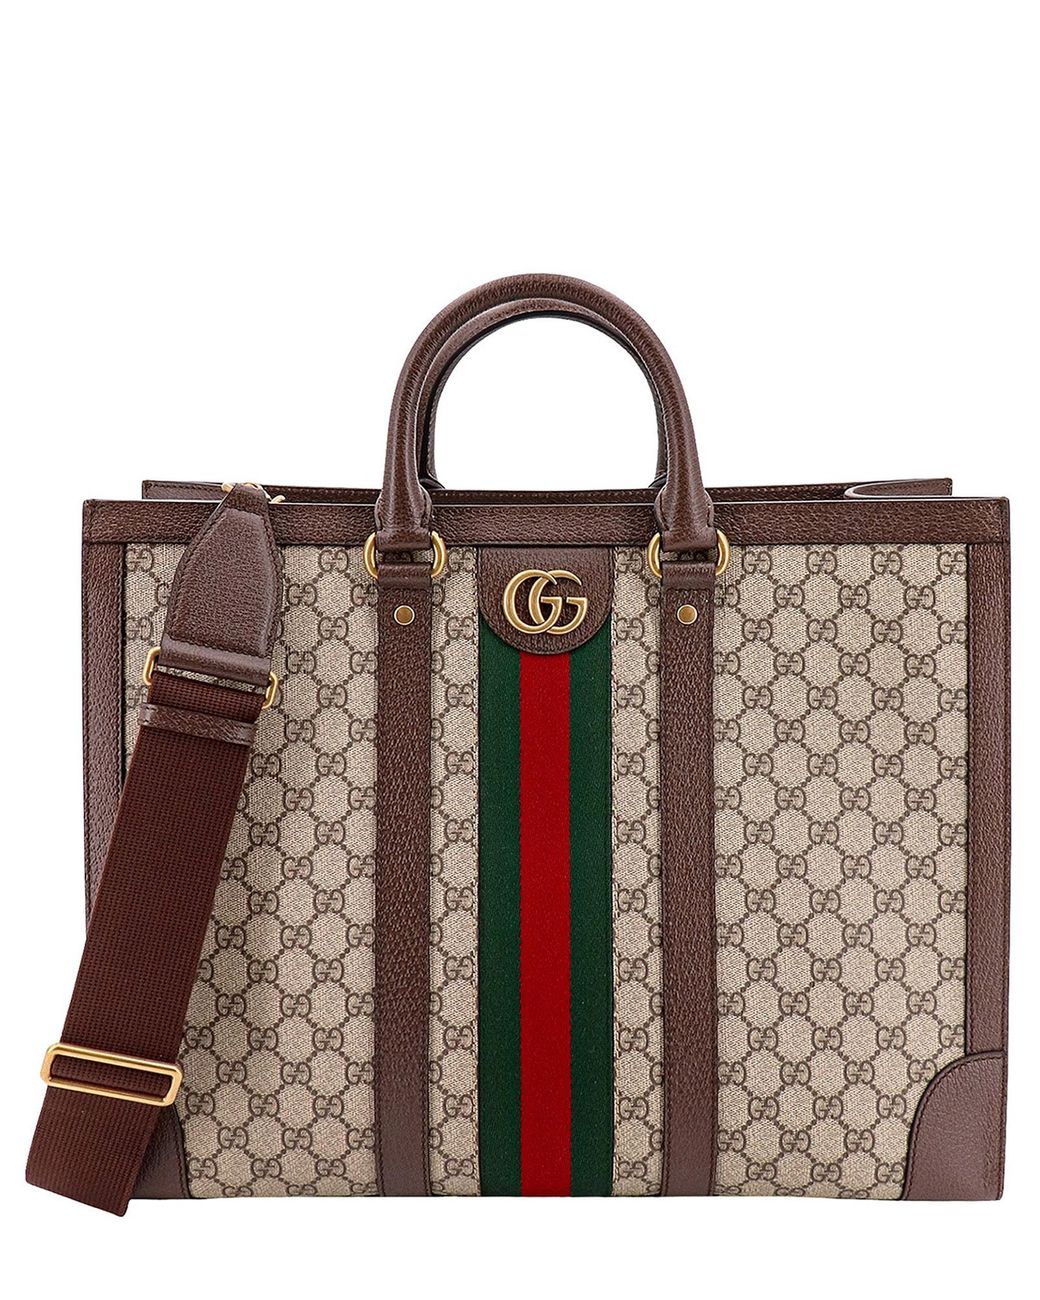 Gucci, Ophidia Leather-Trimmed Monogrammed Coated-Canvas Tote Bag, Men, Brown